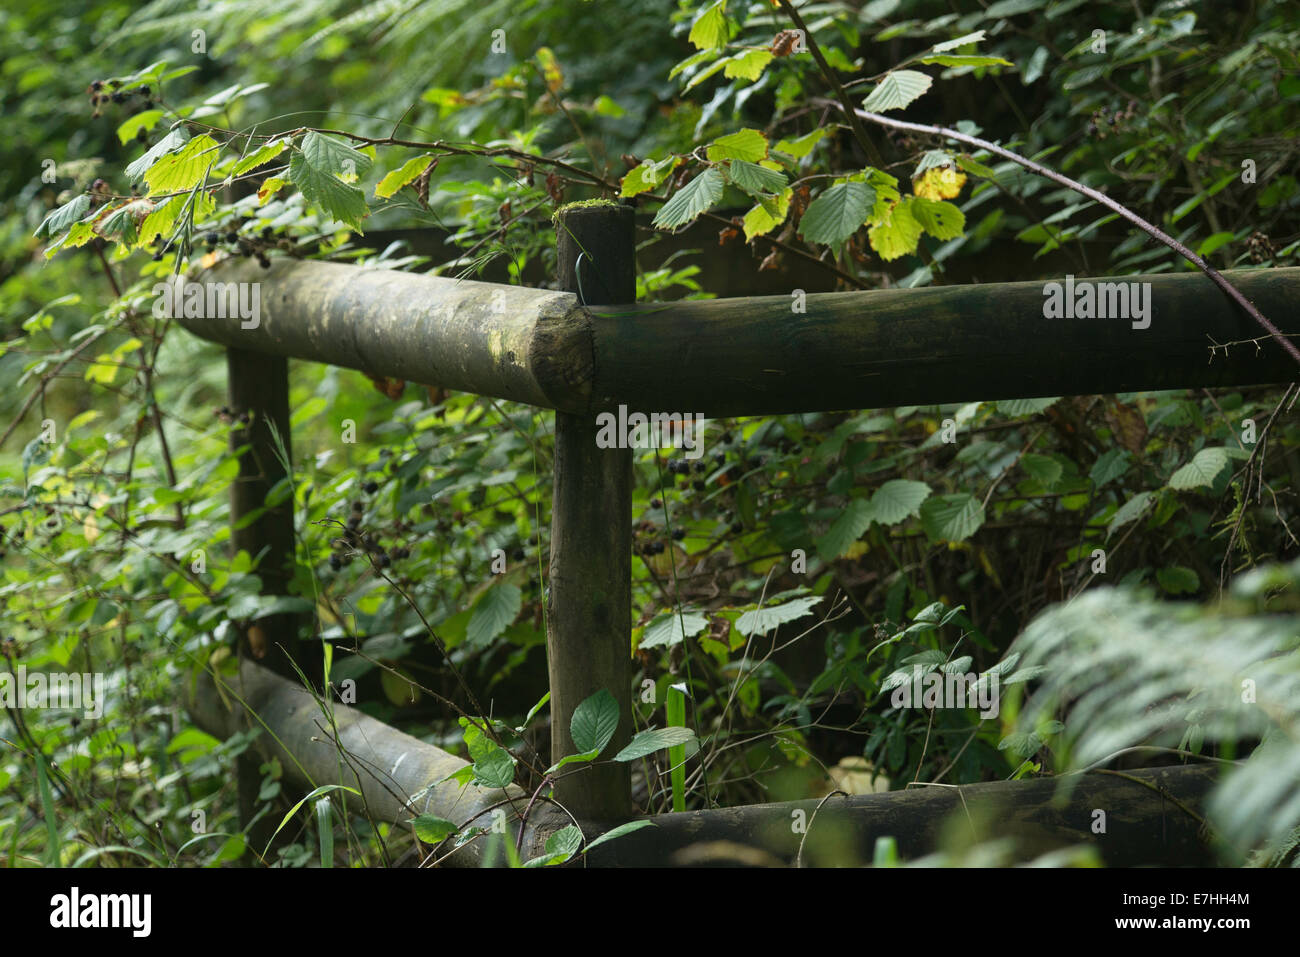 Wooden structure in woodland setting protecting fragile plant Stock Photo